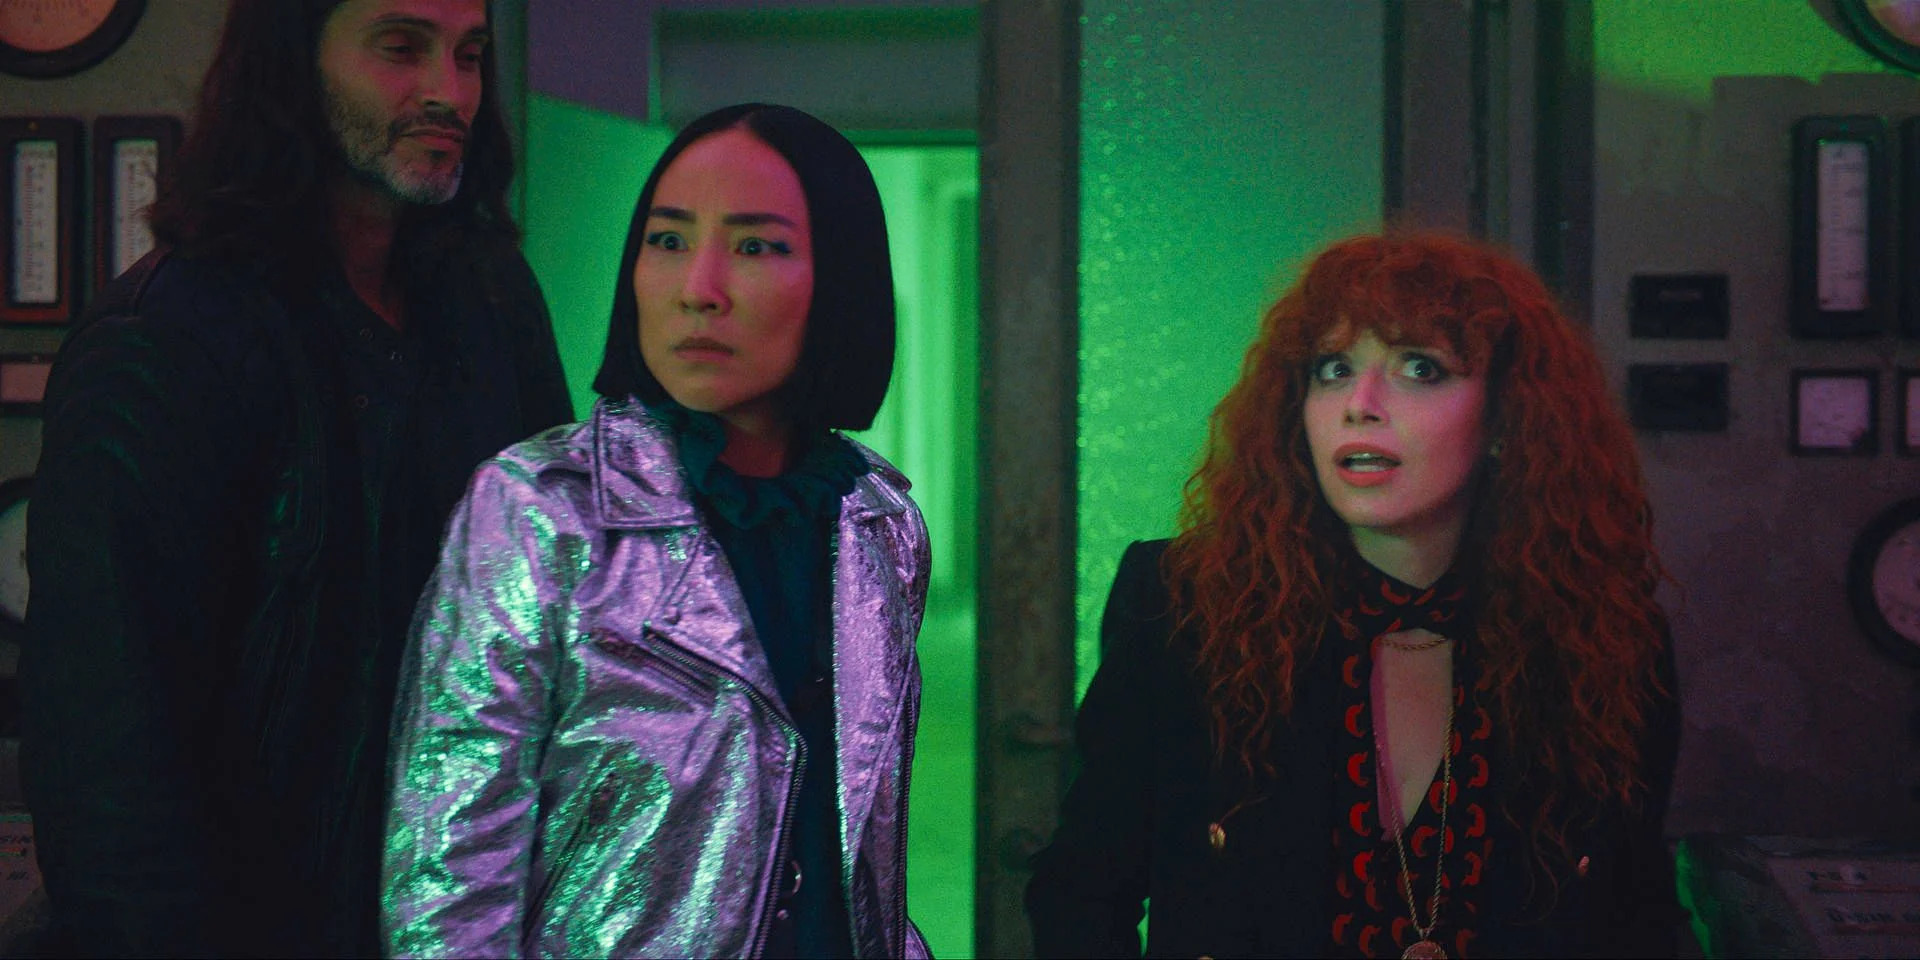 Review: Russian Doll Season 2 is Creative and Humorous